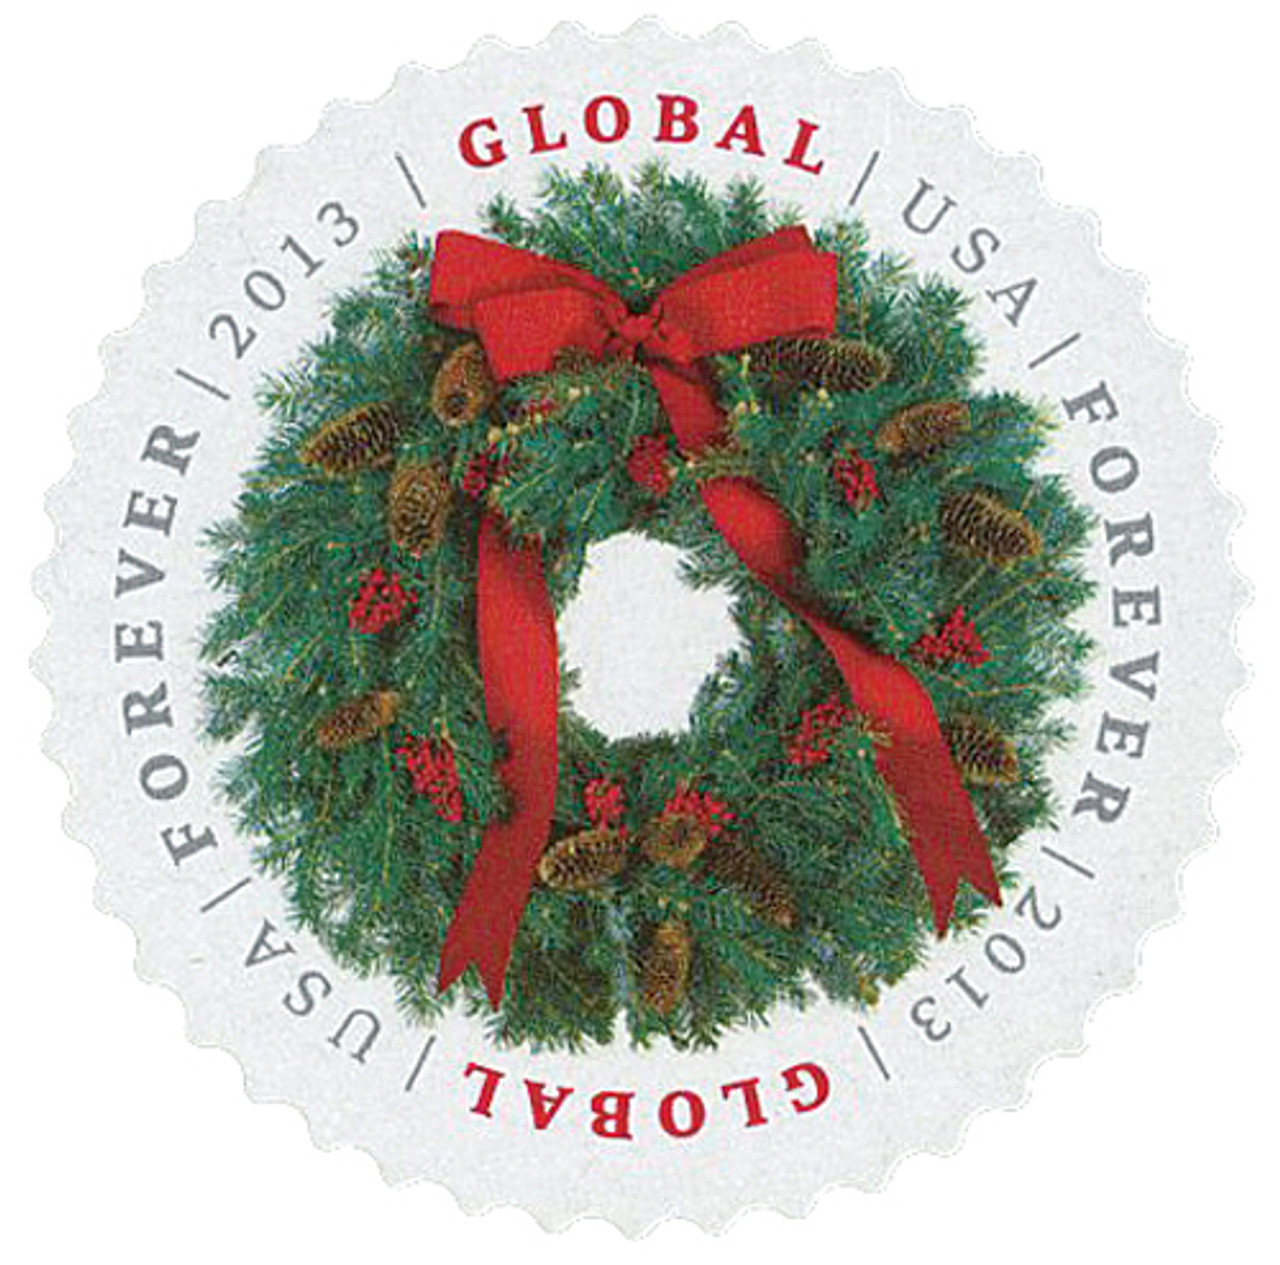 4936 - 2014 Global Forever Stamp - Silver Bells Wreath - Mystic